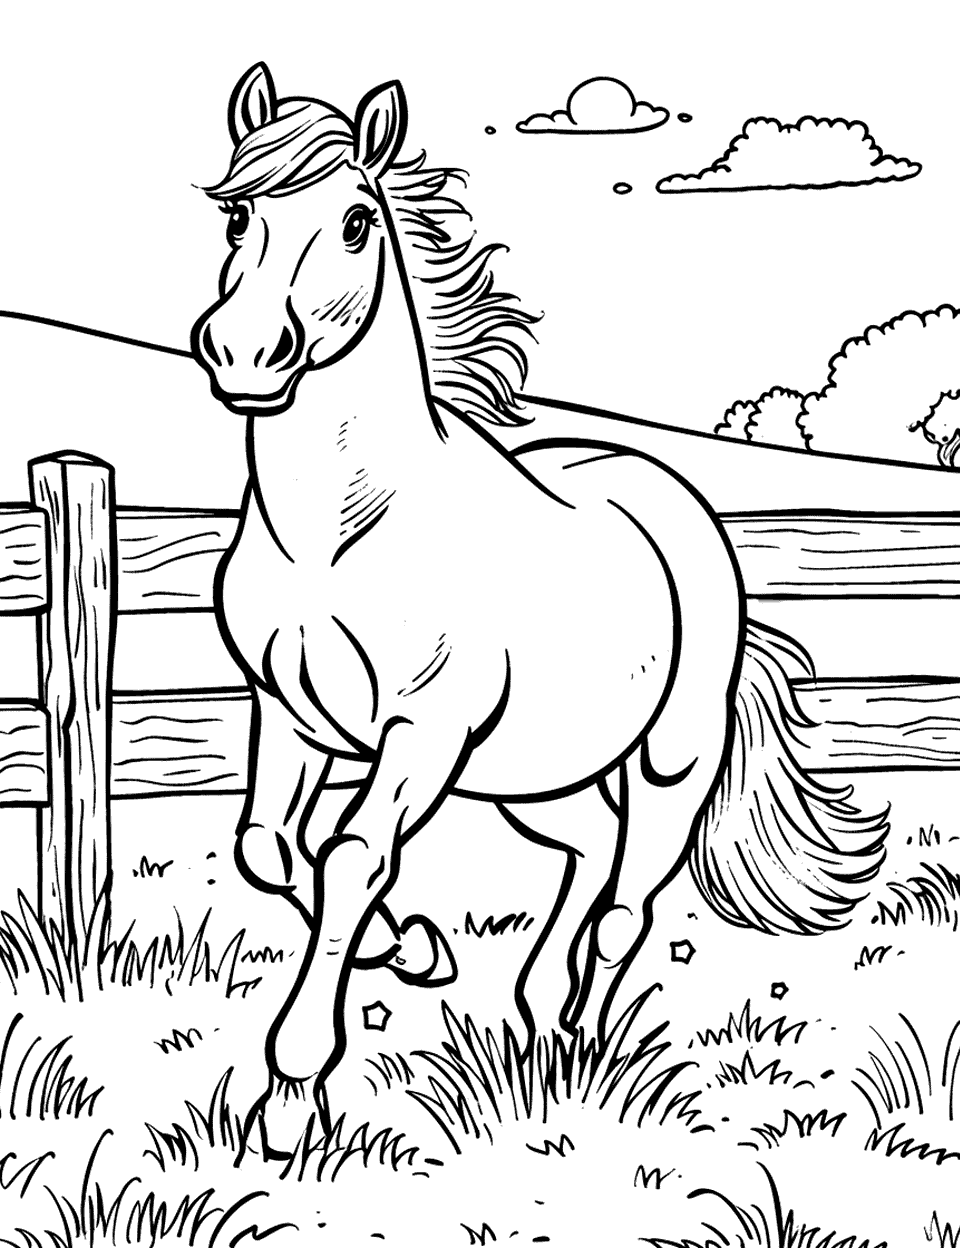 Horse Galloping by a Fence Farm Animal Coloring Page - A majestic horse galloping along a wooden fence line in a field.